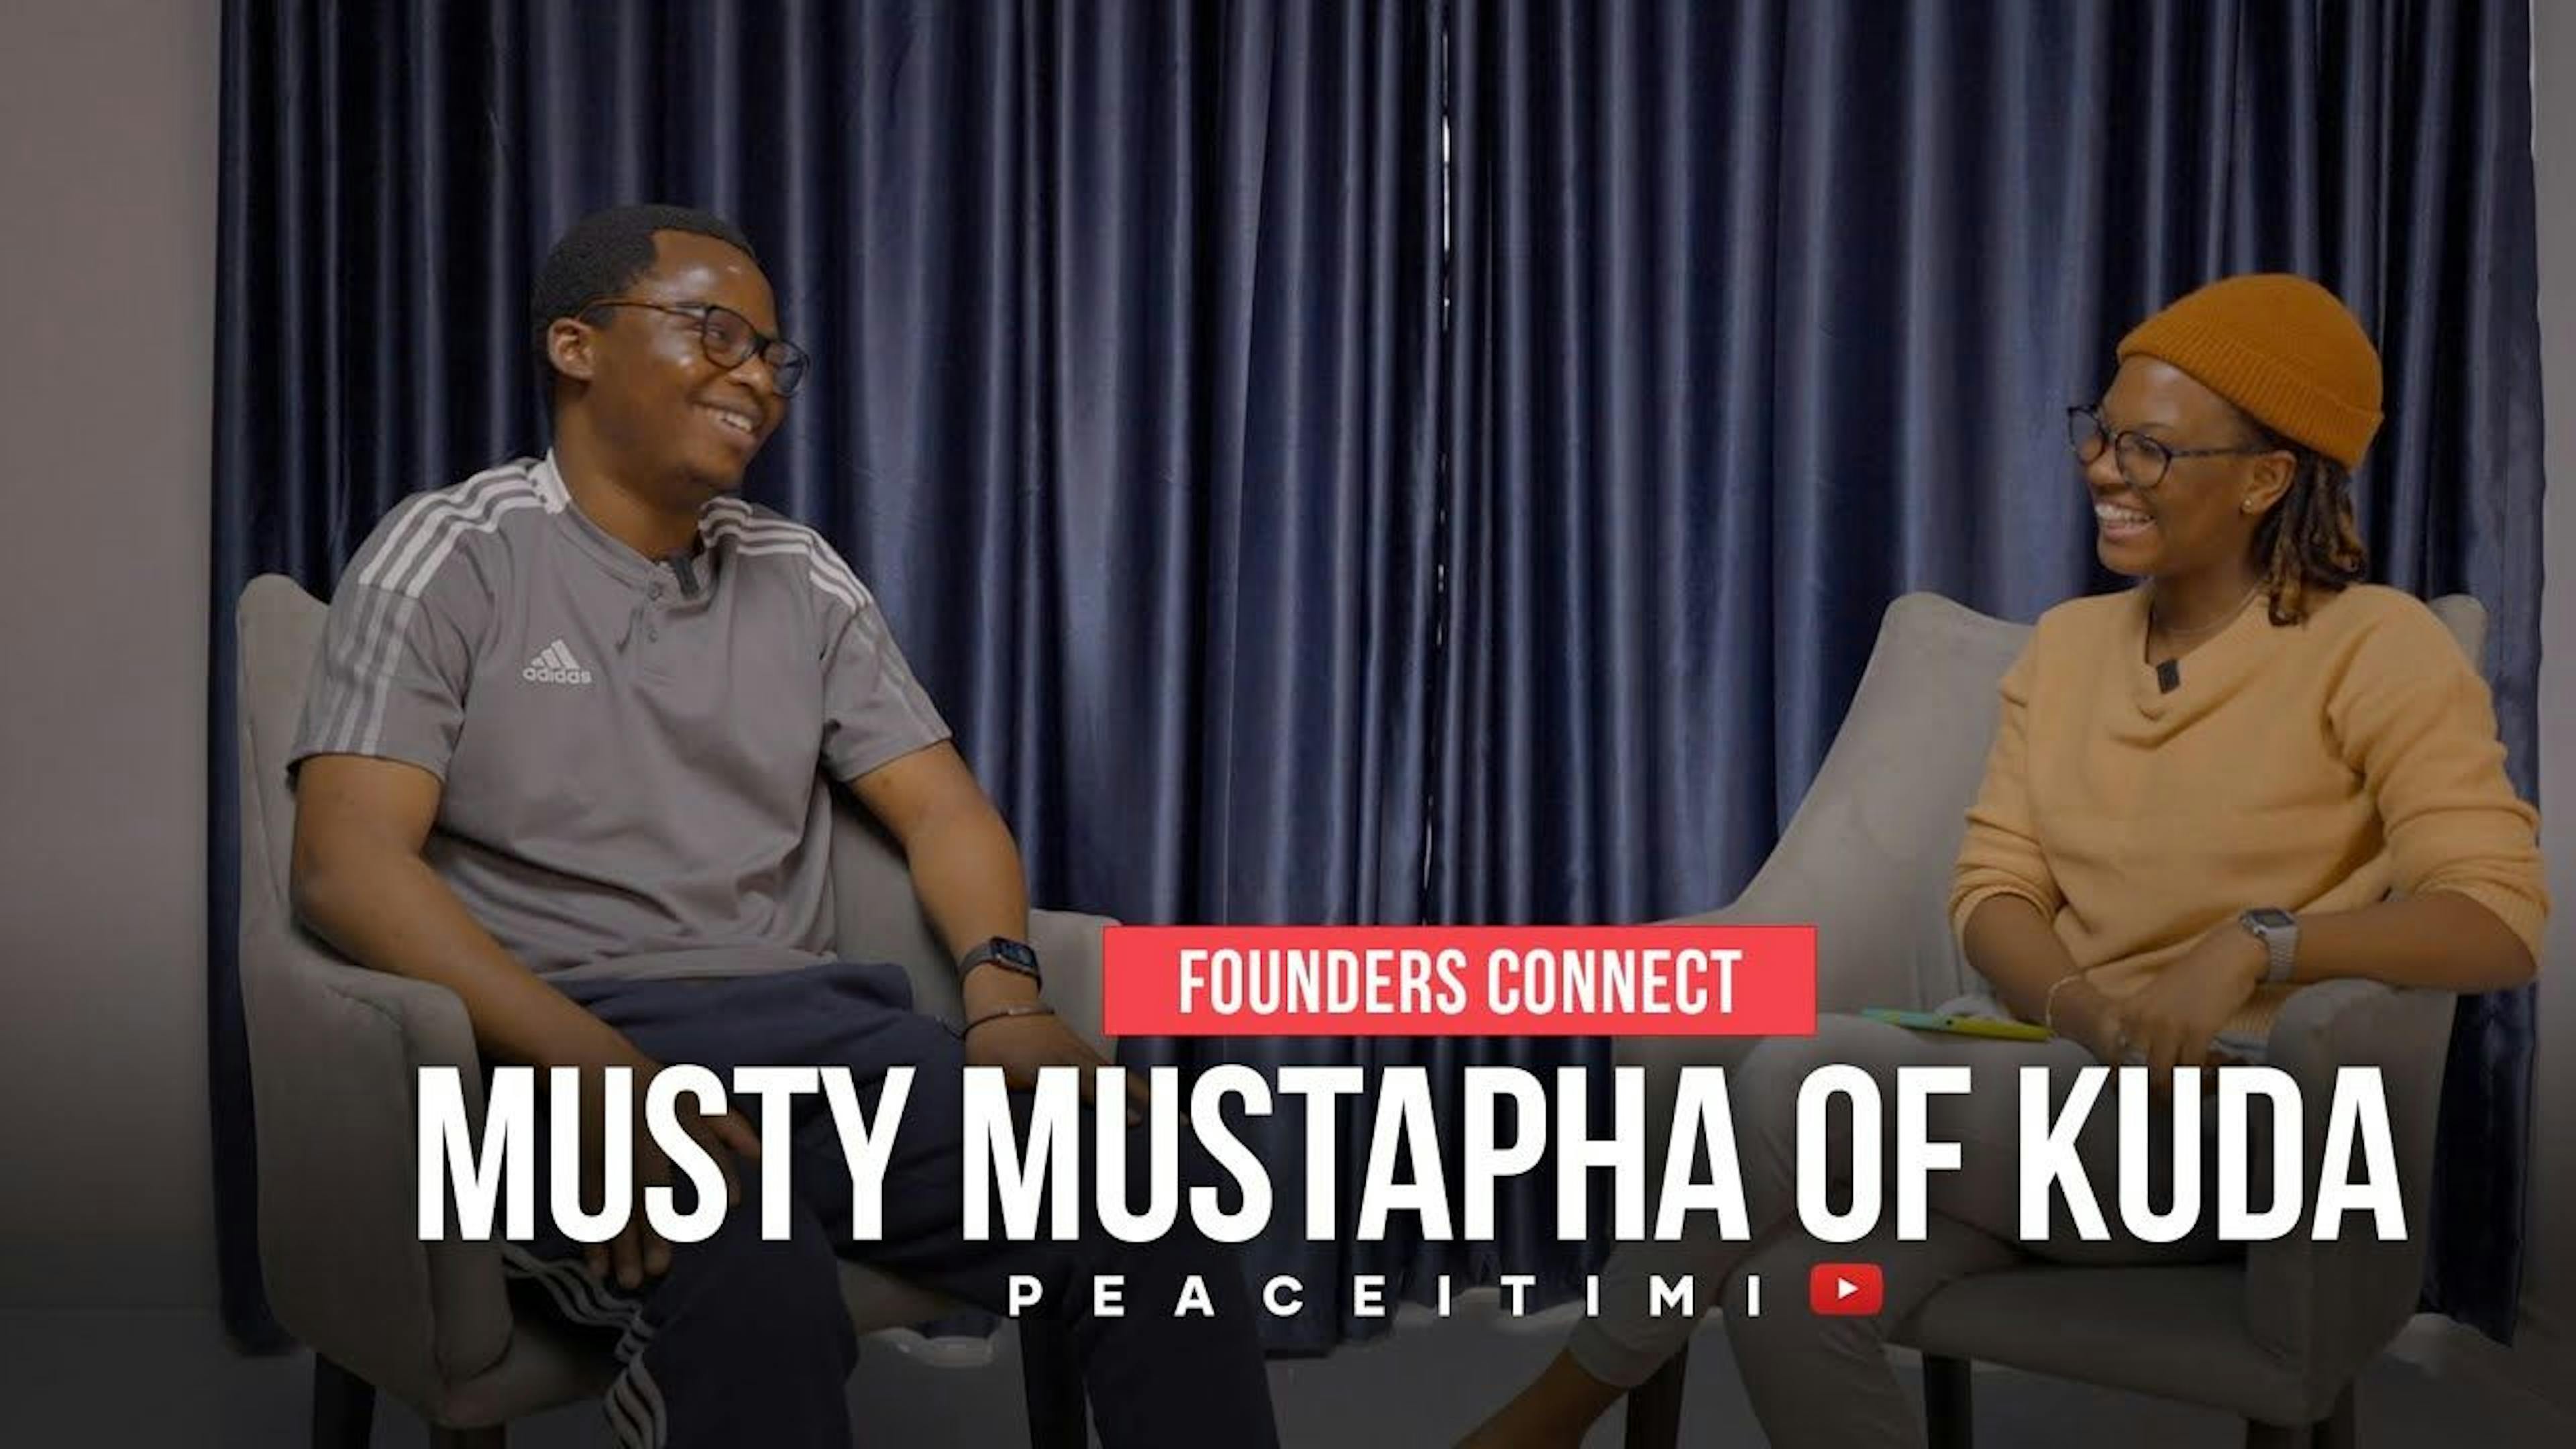 featured image - #FoundersConnect: Interview with Musty Mustapha, Co-Founder & CTO of Kuda